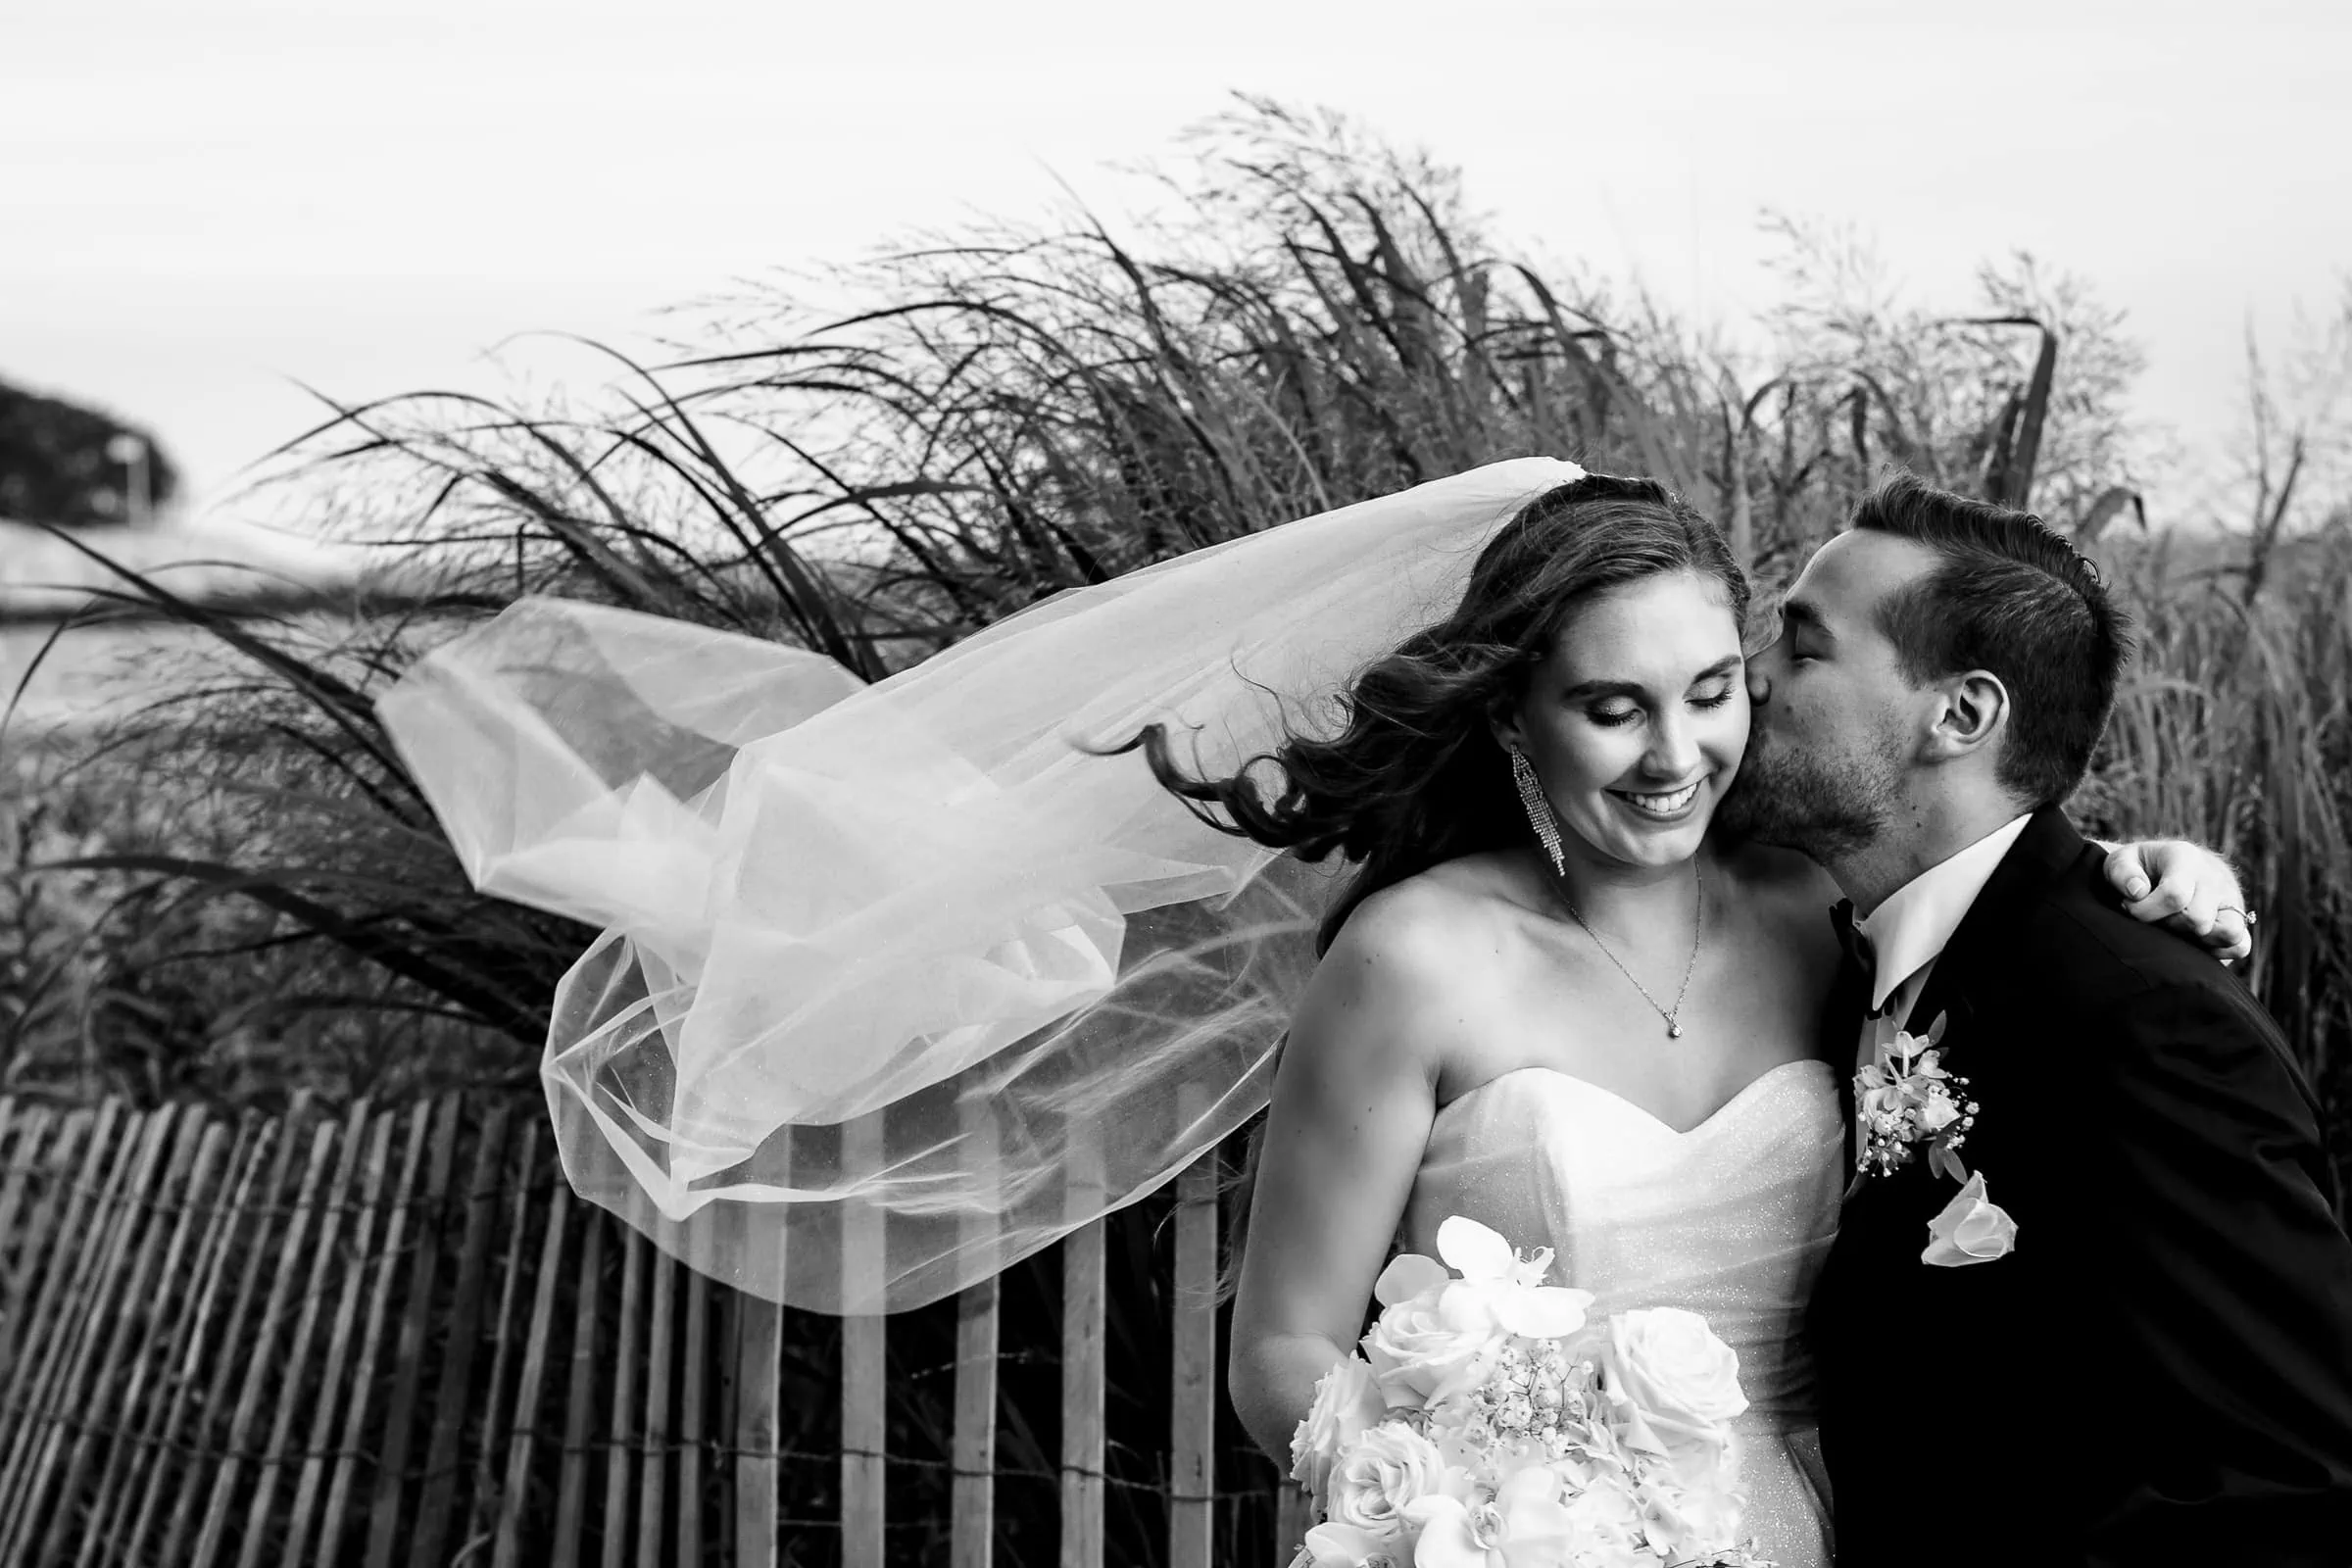 A man kisses a womans cheek as she looks down and her veil blows in the wind in front of tall beach grasses